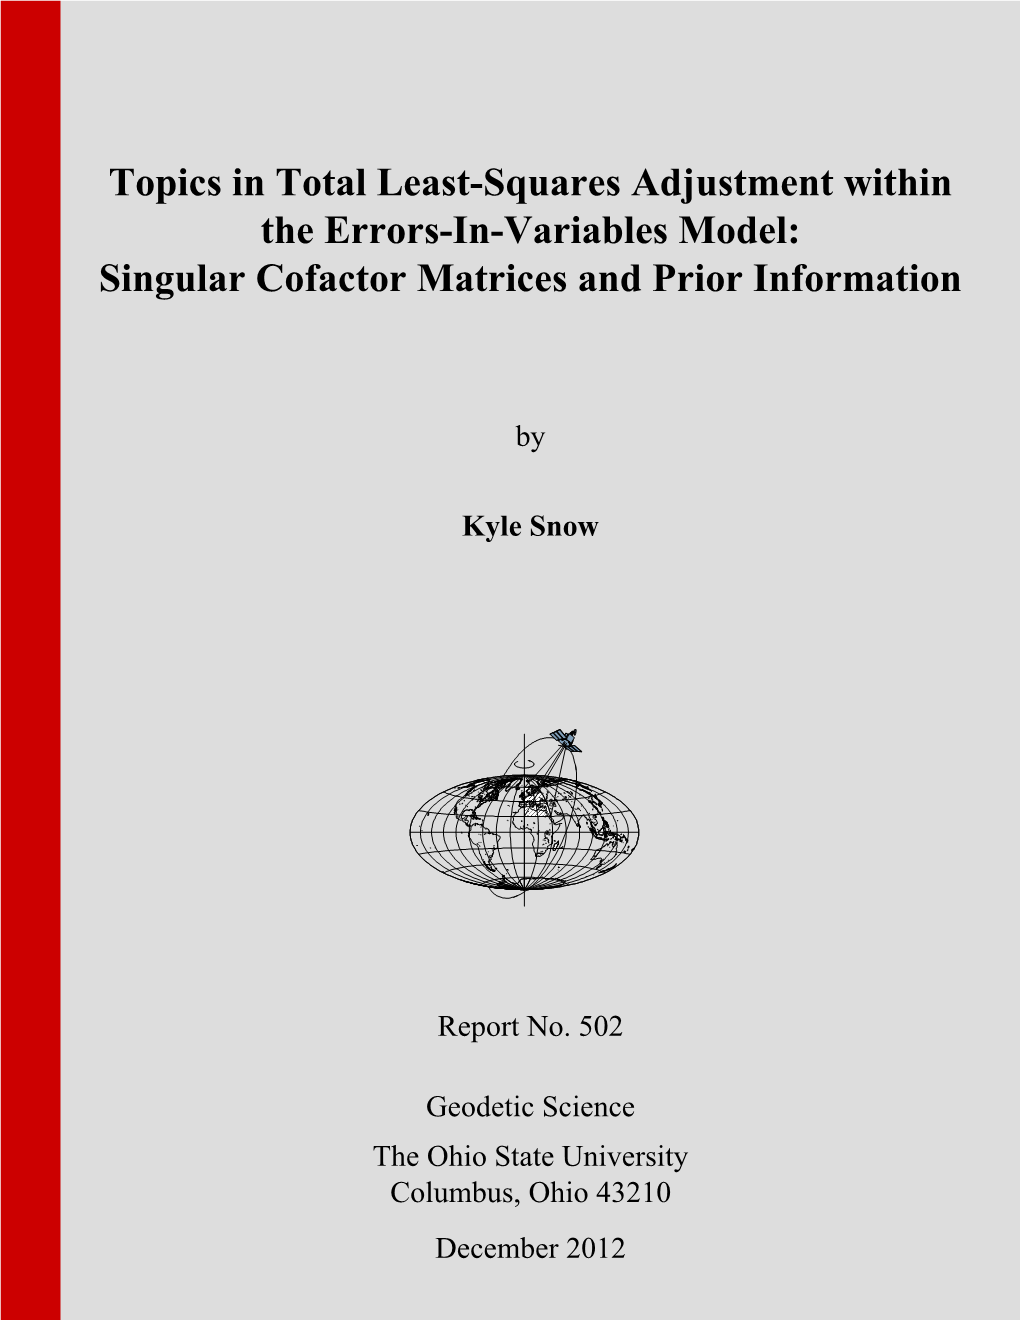 Topics in Total Least-Squares Adjustment Within the Errors-In-Variables Model: Singular Cofactor Matrices and Prior Information